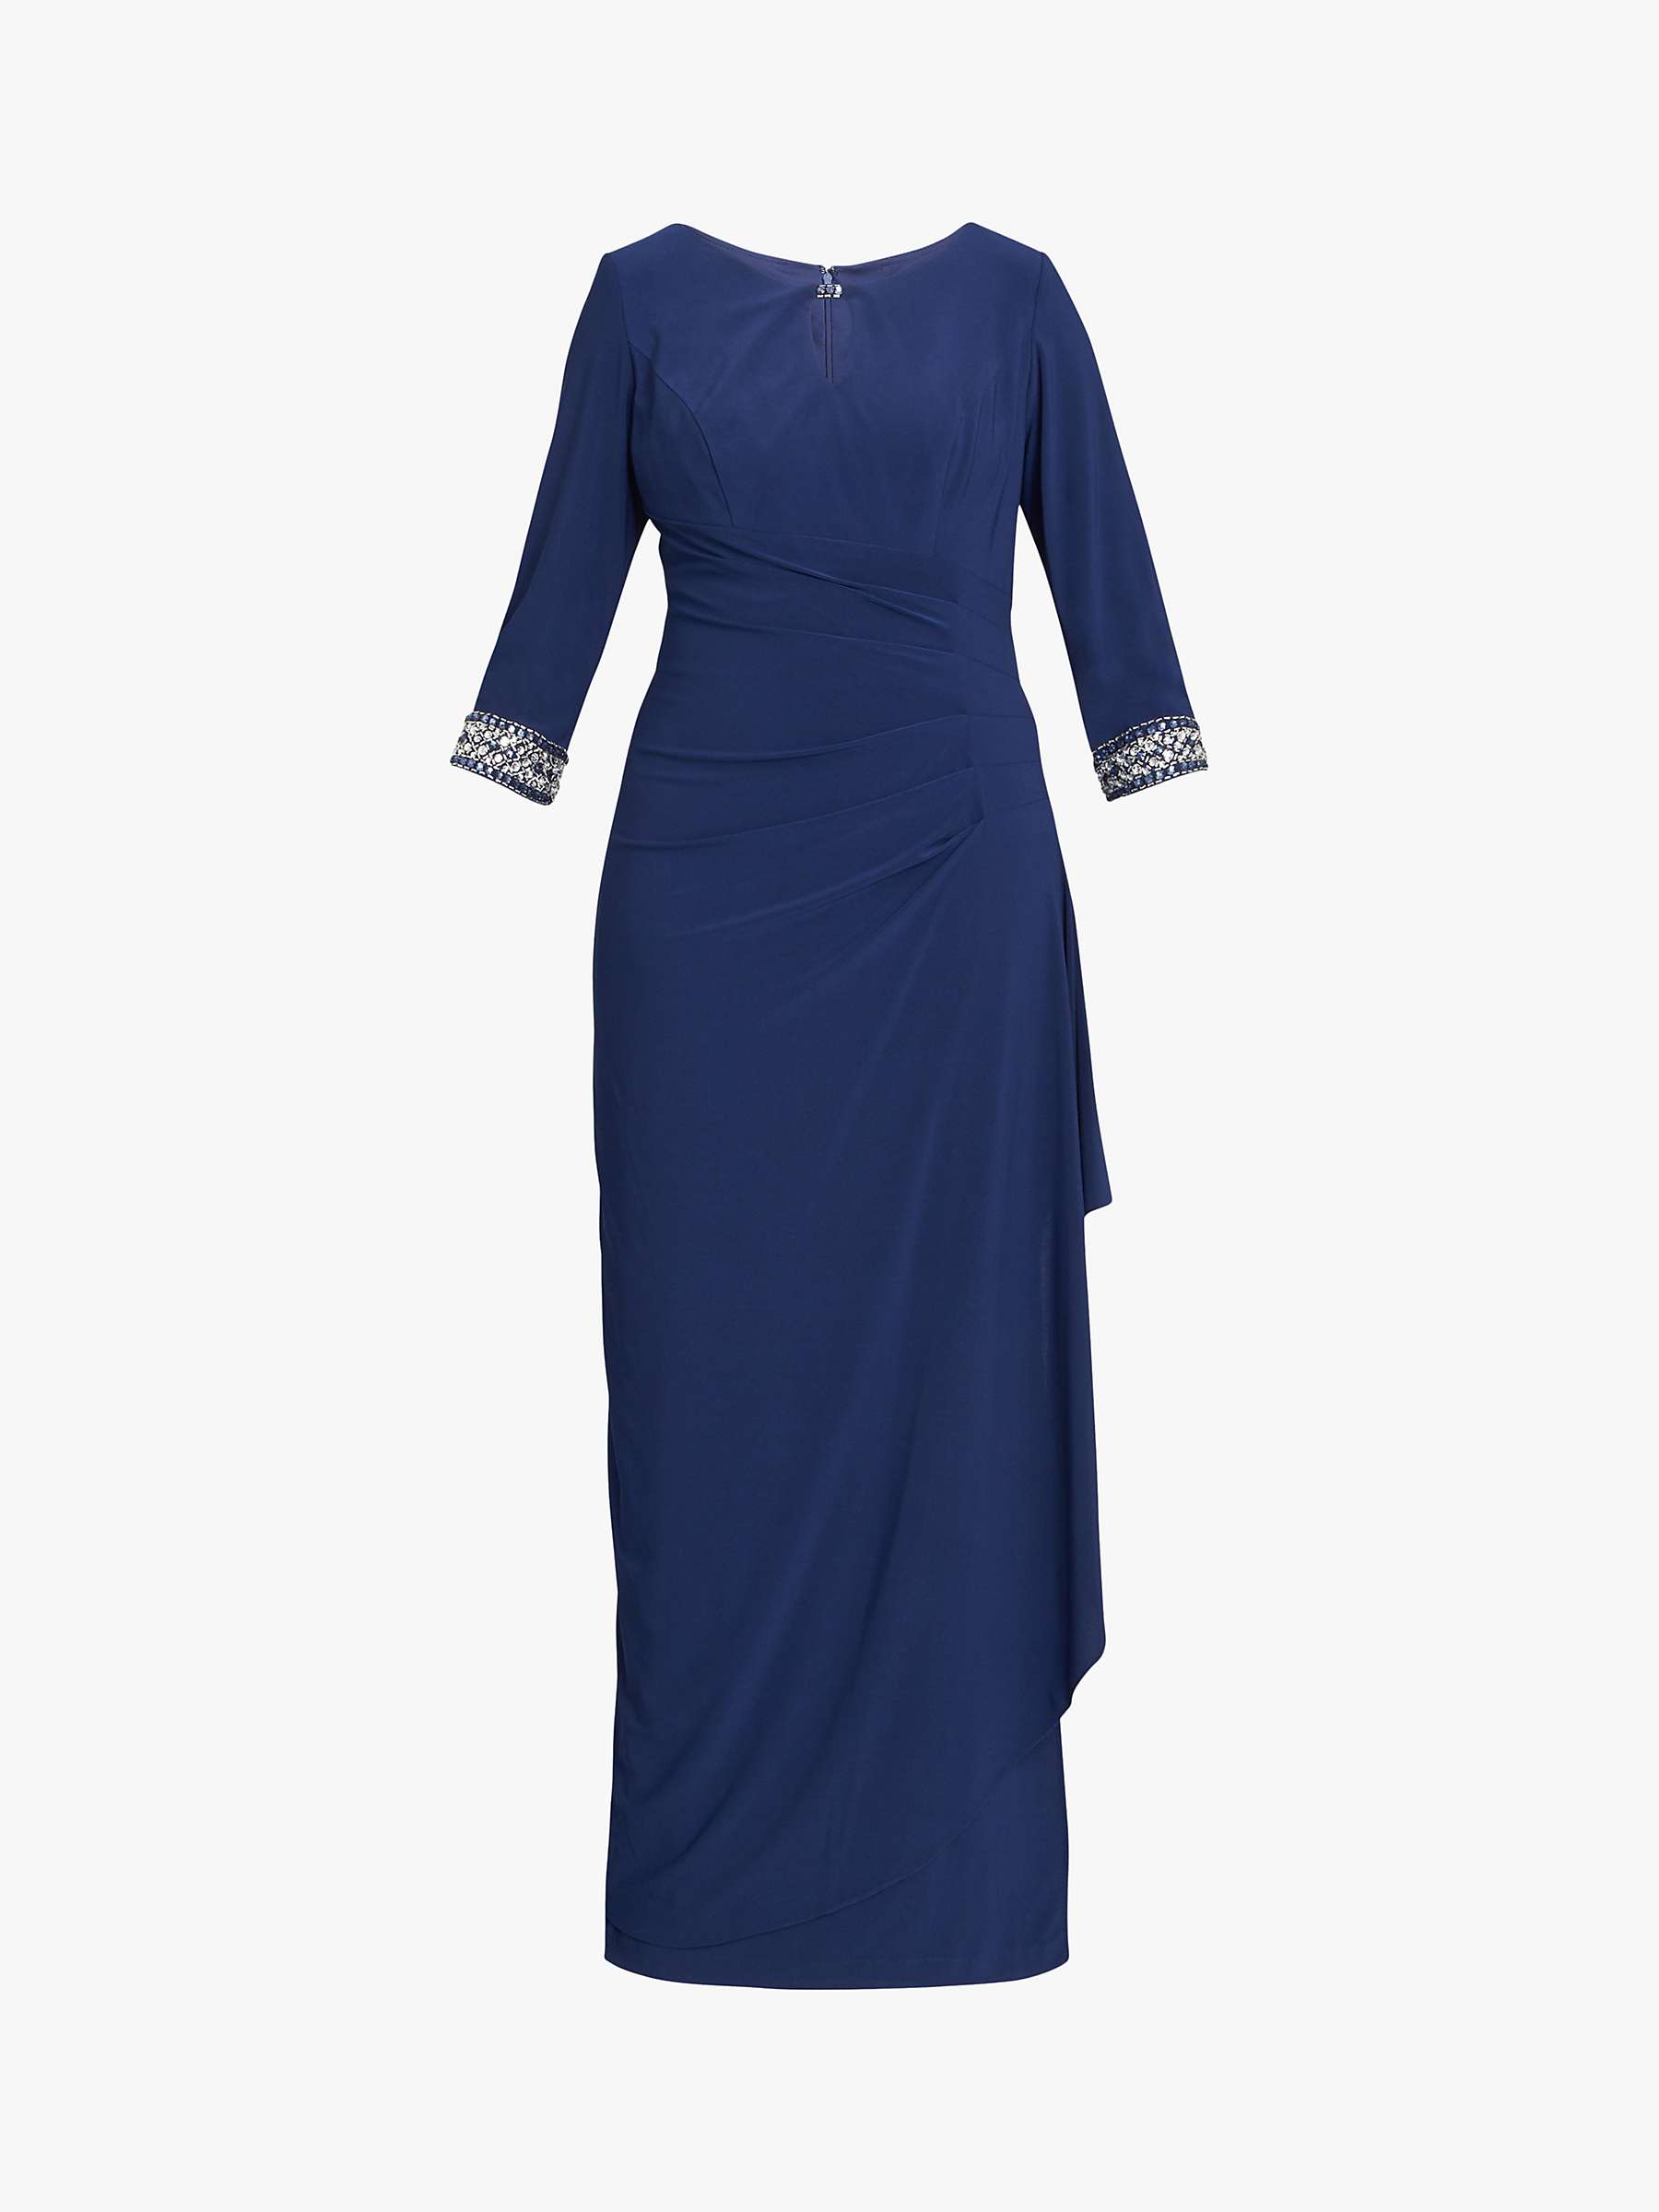 Buy Gina Bacconi Akia Jersey A-Line Maxi Dress, Cosmic Blue Online at johnlewis.com